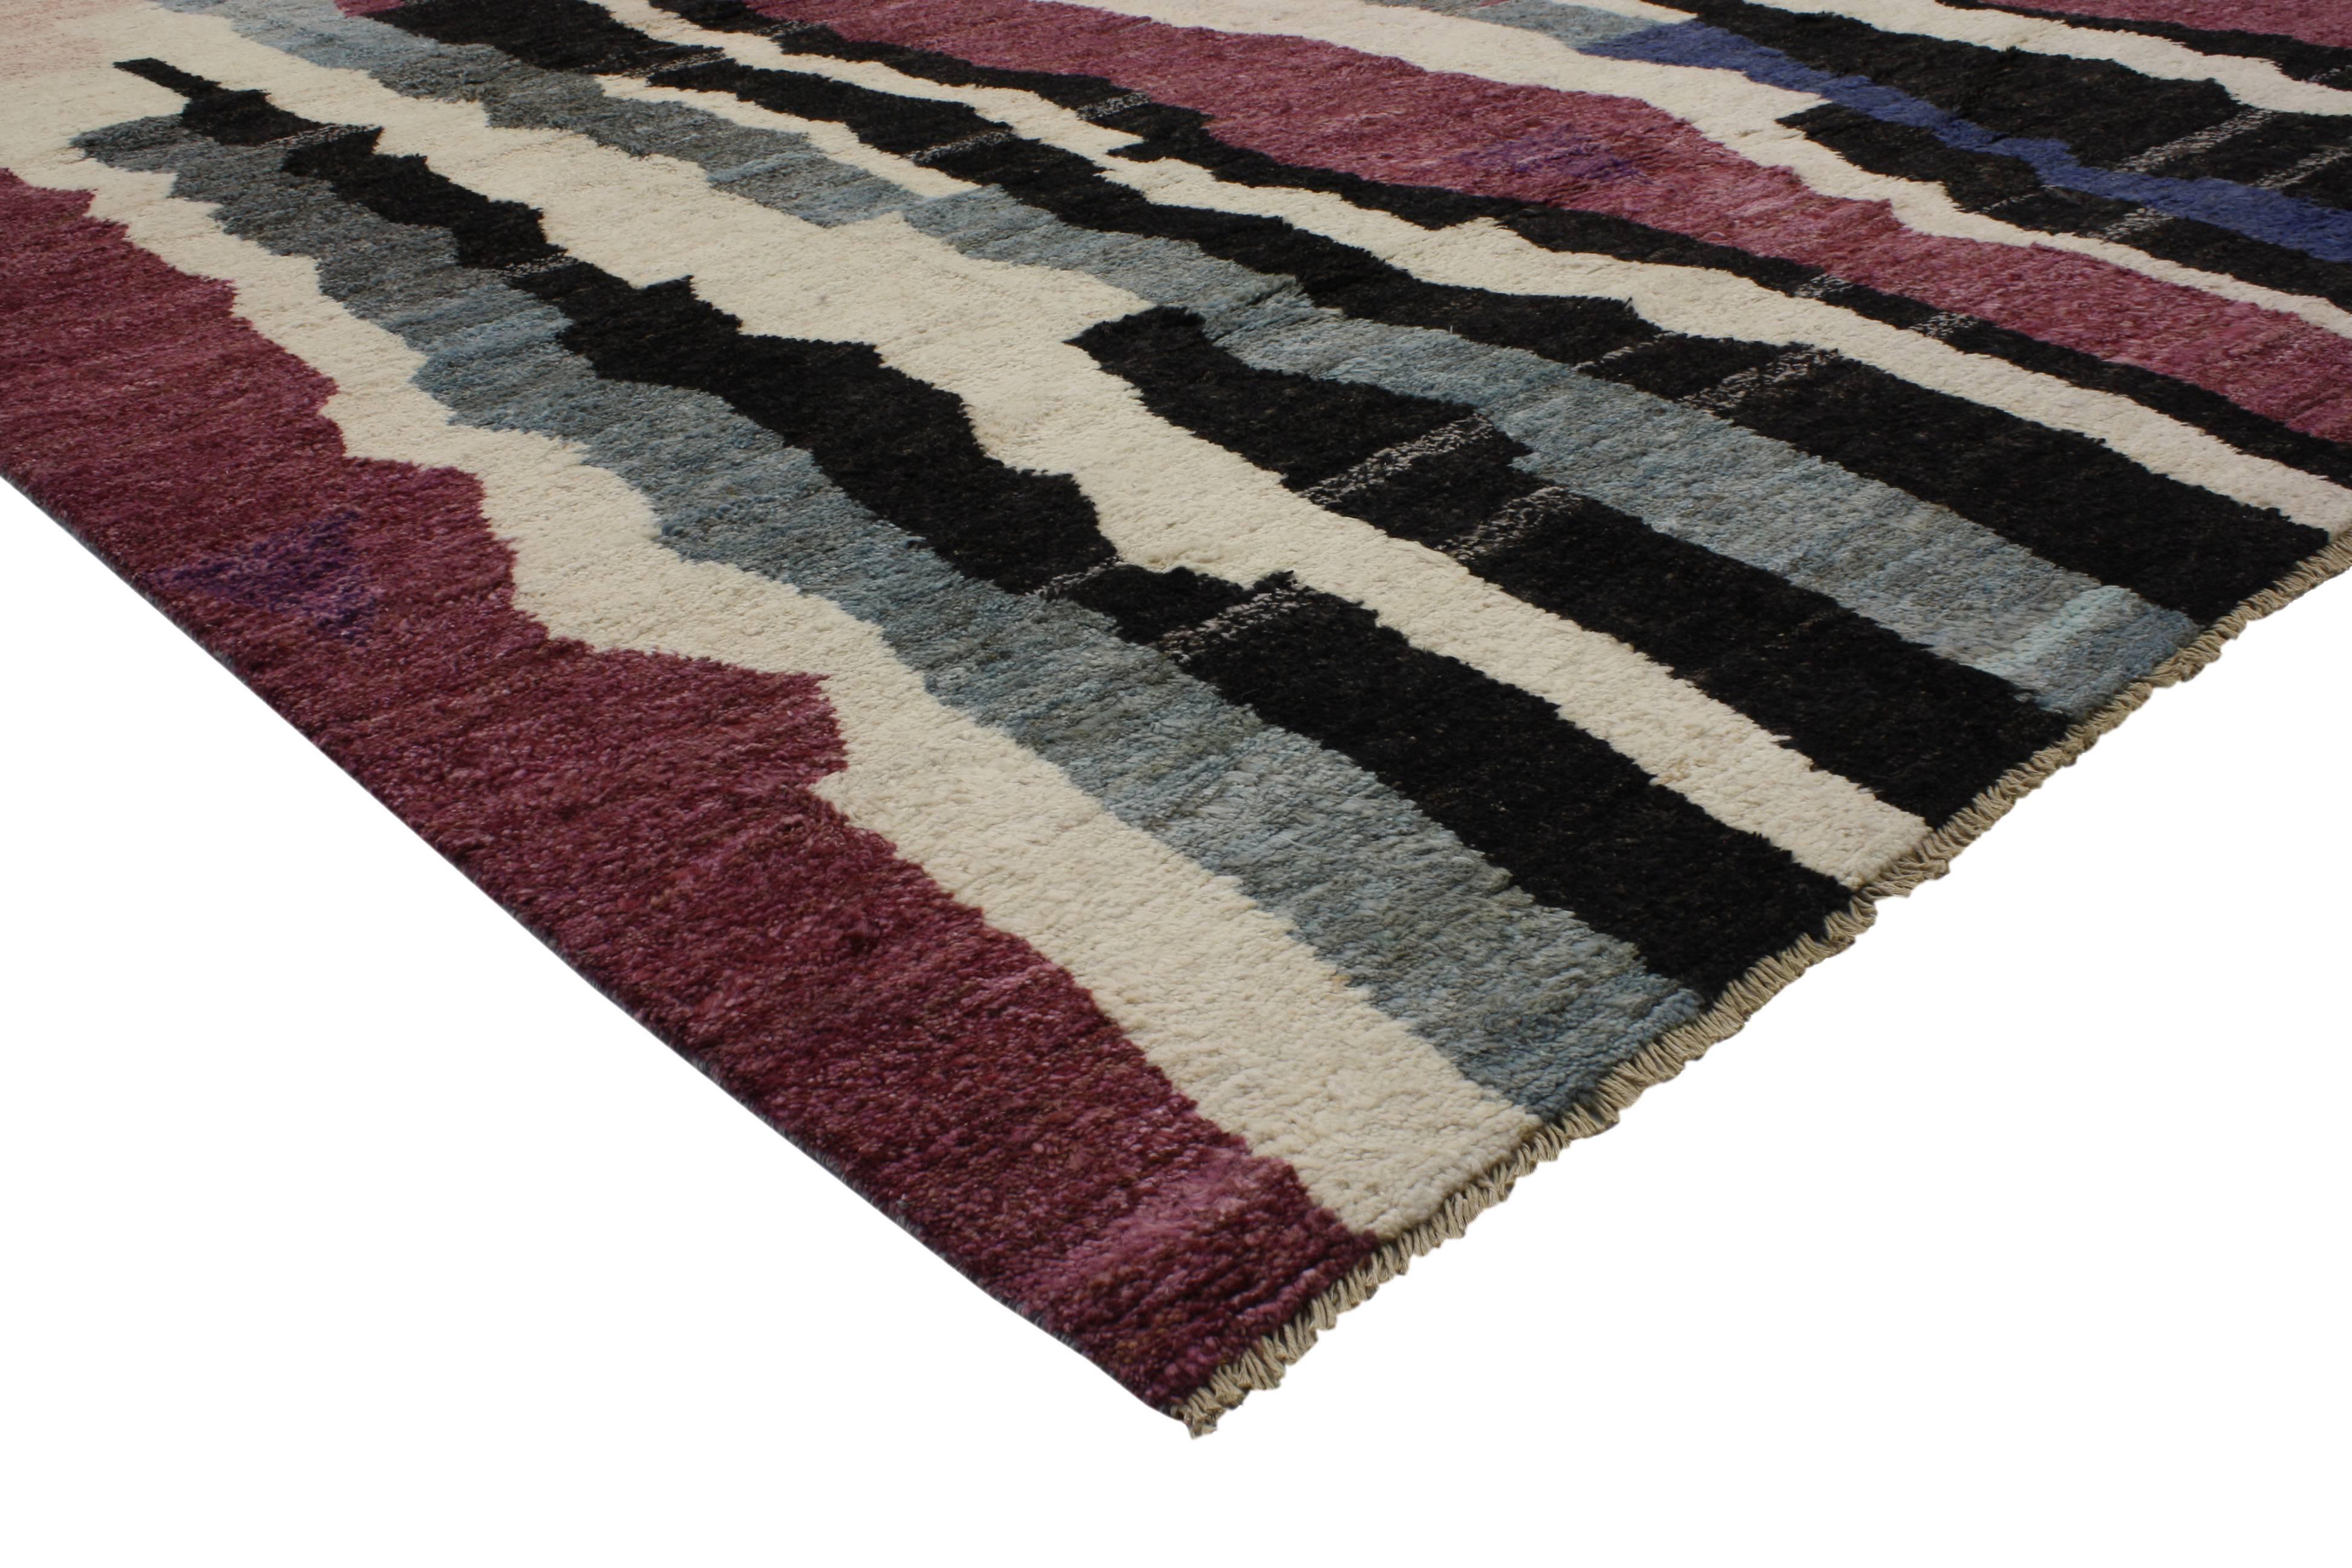 80341 Contemporary Moroccan Style Rug With Post-Modern Style, 10'05 x 13'09. Set off with stylish levels of complexity and its highly decorative aesthetic, this contemporary Moroccan style rug features a post-modern style and Memphis Group Design.